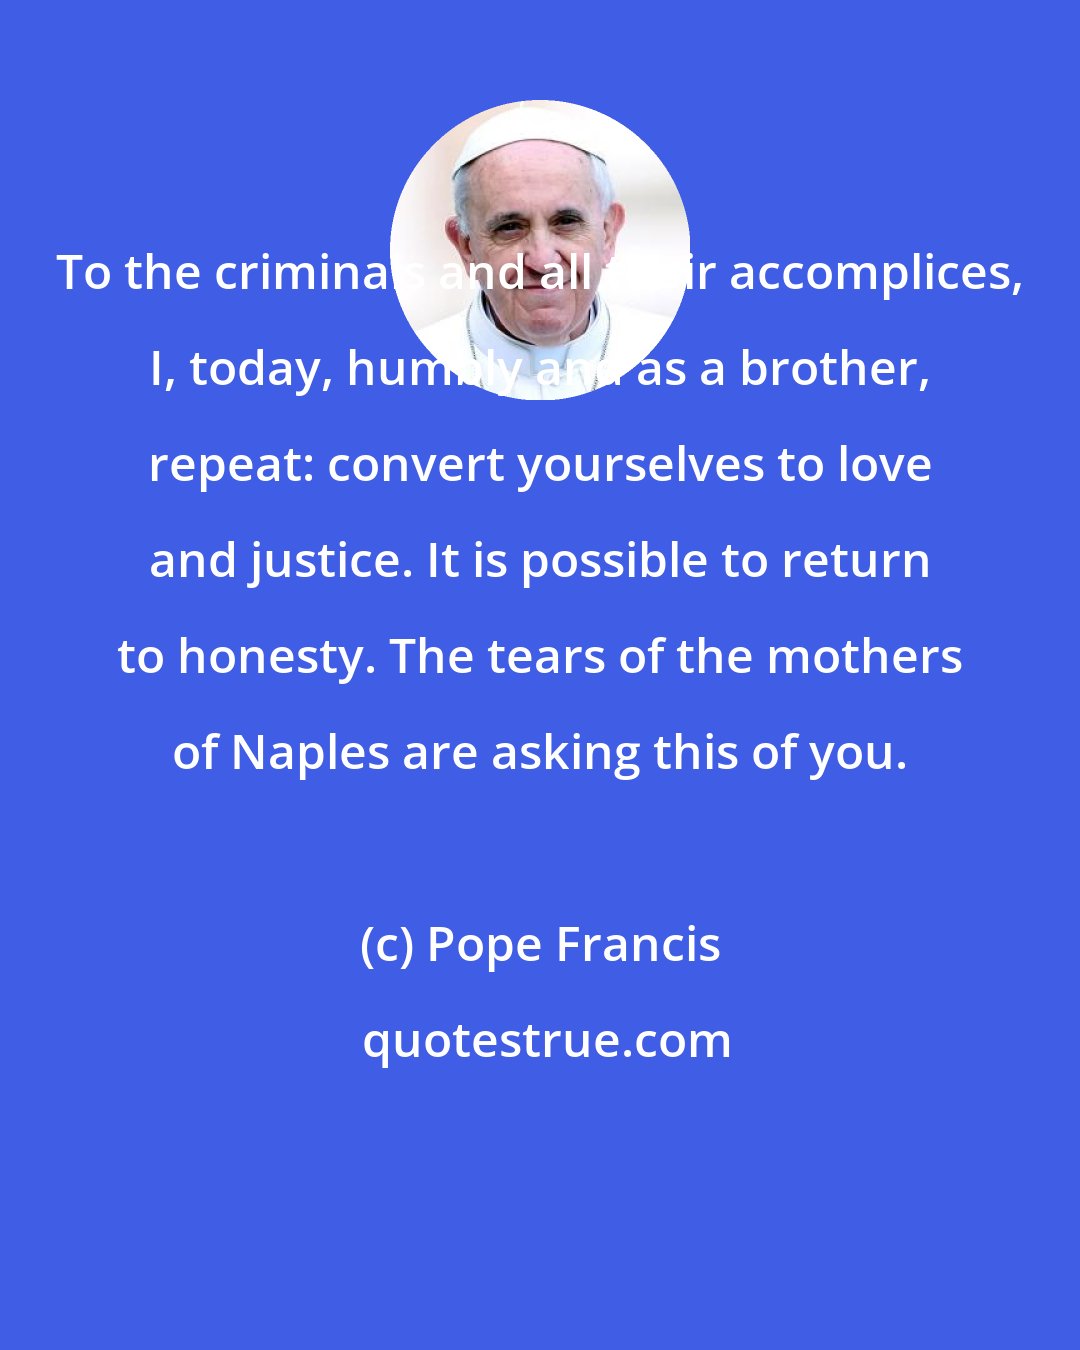 Pope Francis: To the criminals and all their accomplices, I, today, humbly and as a brother, repeat: convert yourselves to love and justice. It is possible to return to honesty. The tears of the mothers of Naples are asking this of you.